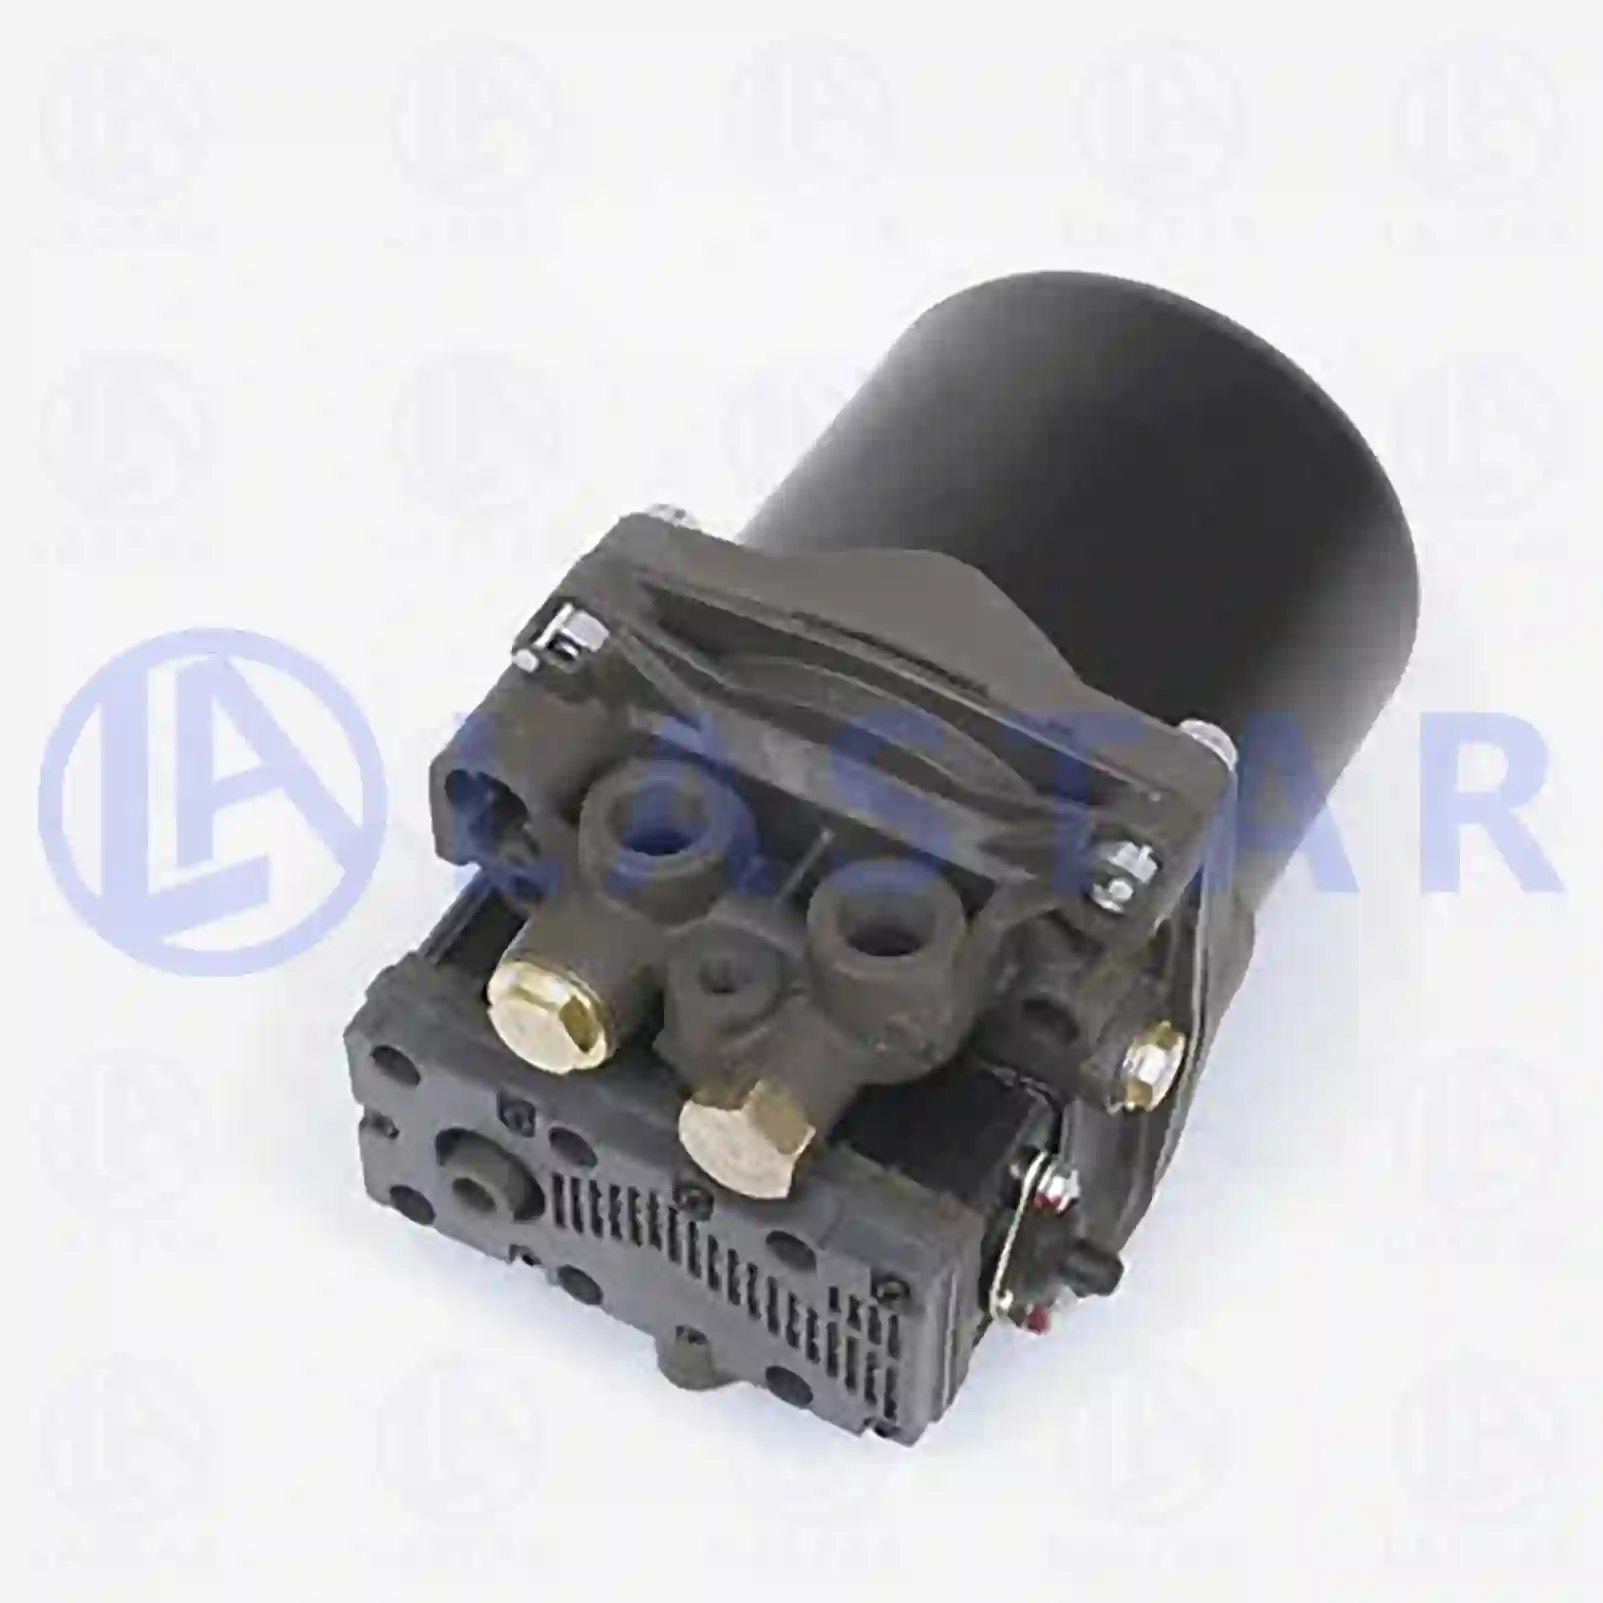 Air dryer, with heating unit, 77716500, 3194899, 70313308, 9517283, 9957313 ||  77716500 Lastar Spare Part | Truck Spare Parts, Auotomotive Spare Parts Air dryer, with heating unit, 77716500, 3194899, 70313308, 9517283, 9957313 ||  77716500 Lastar Spare Part | Truck Spare Parts, Auotomotive Spare Parts